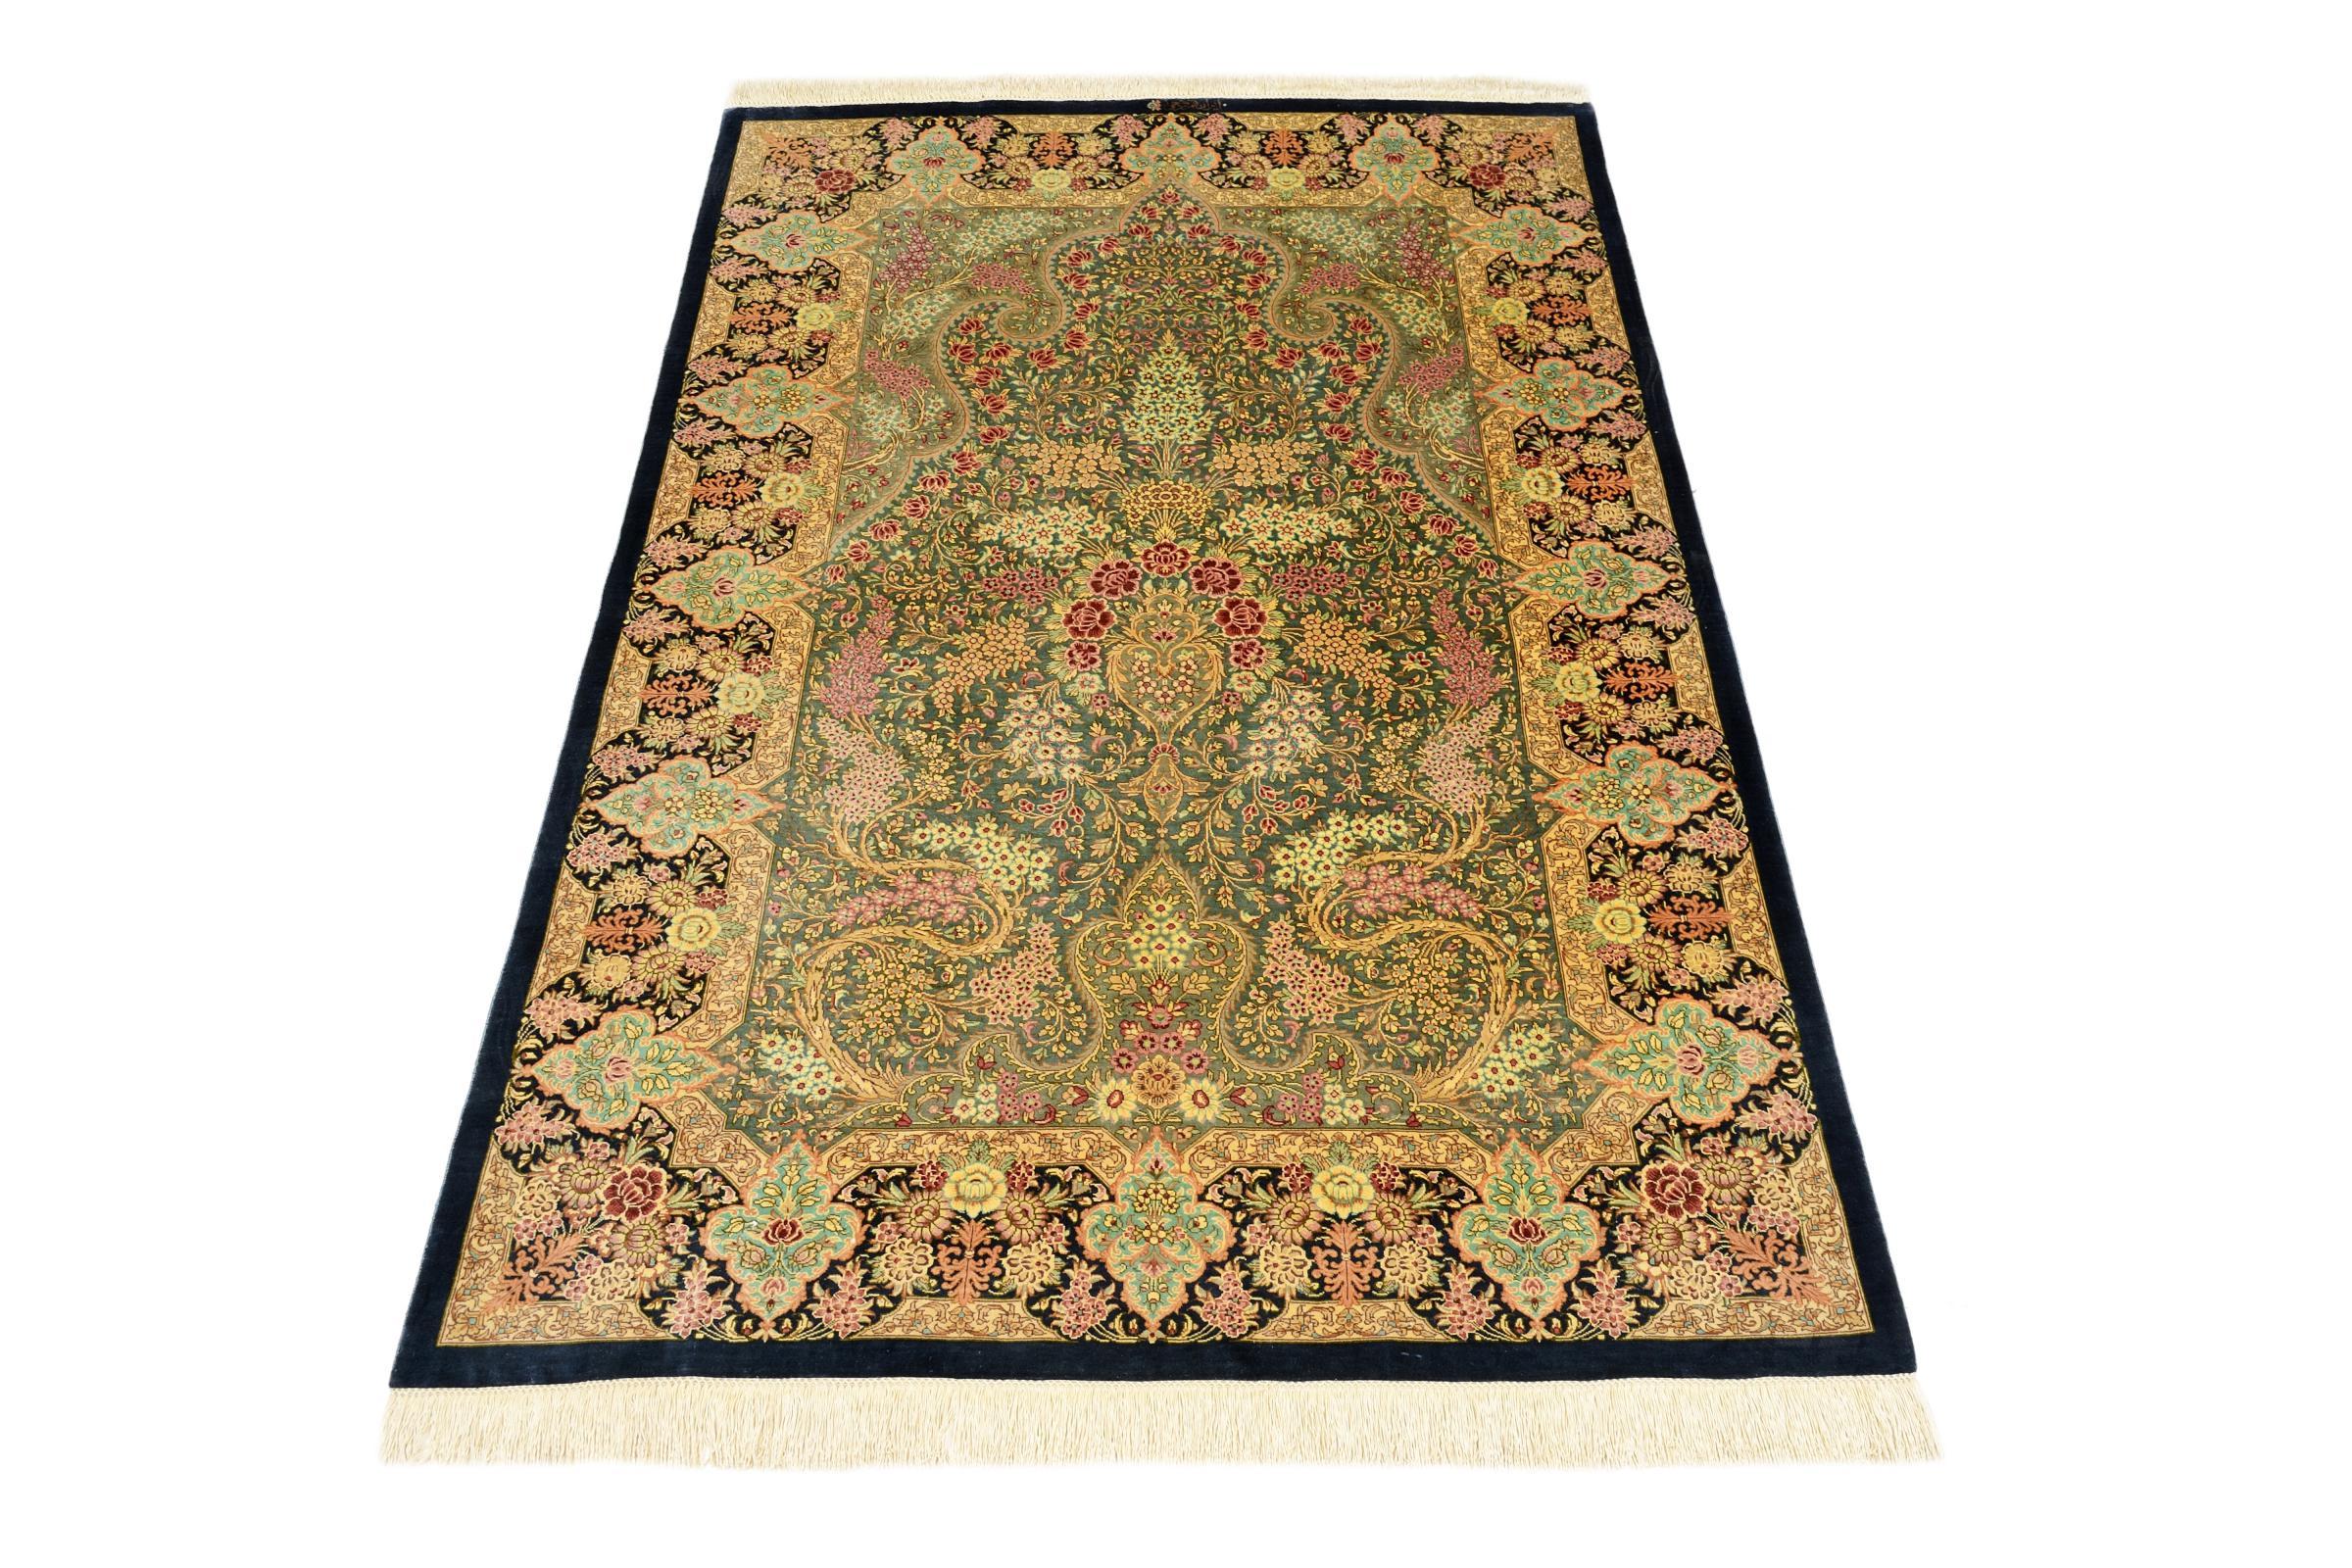 A gorgeous Persian rug, Qum silk, 20th century.
A Persian silk rug stands for pure luxury. This rug in particular, since Qom (also called Qum) silk rugs are known to be the most sophisticated and to count among the finest Persian rugs. Only a